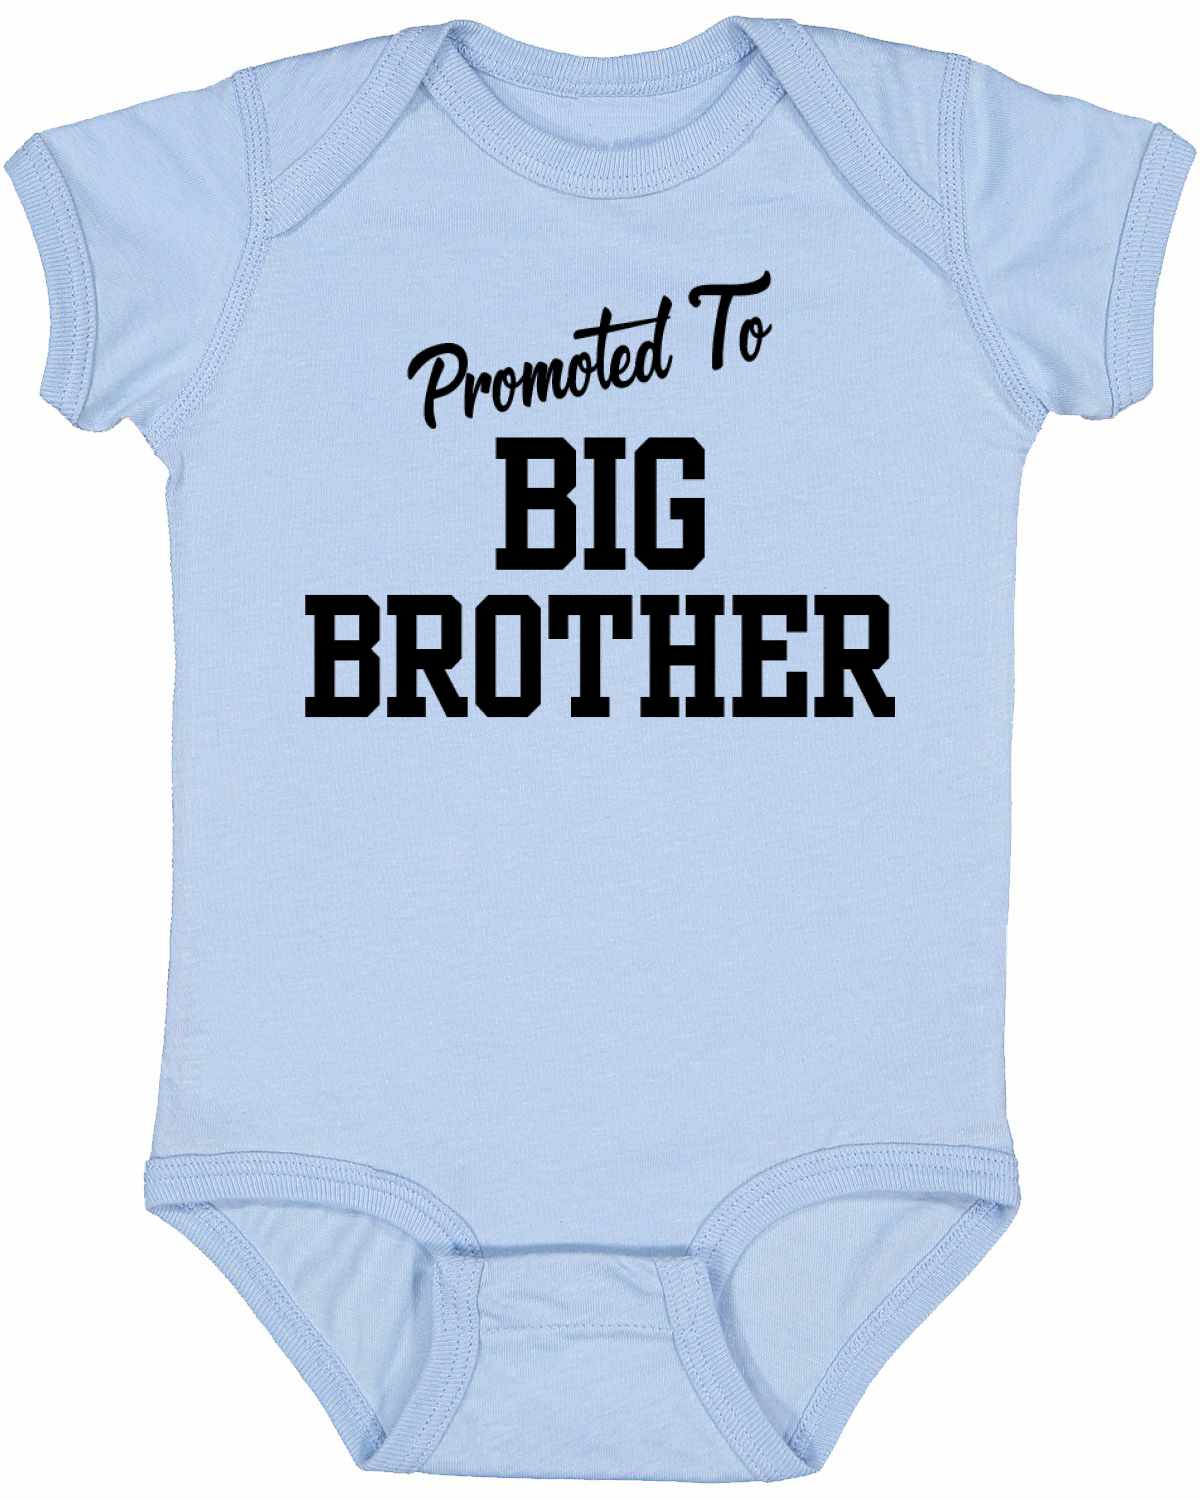 Promoted To Big Brother on Infant BodySuit (#1232-10)